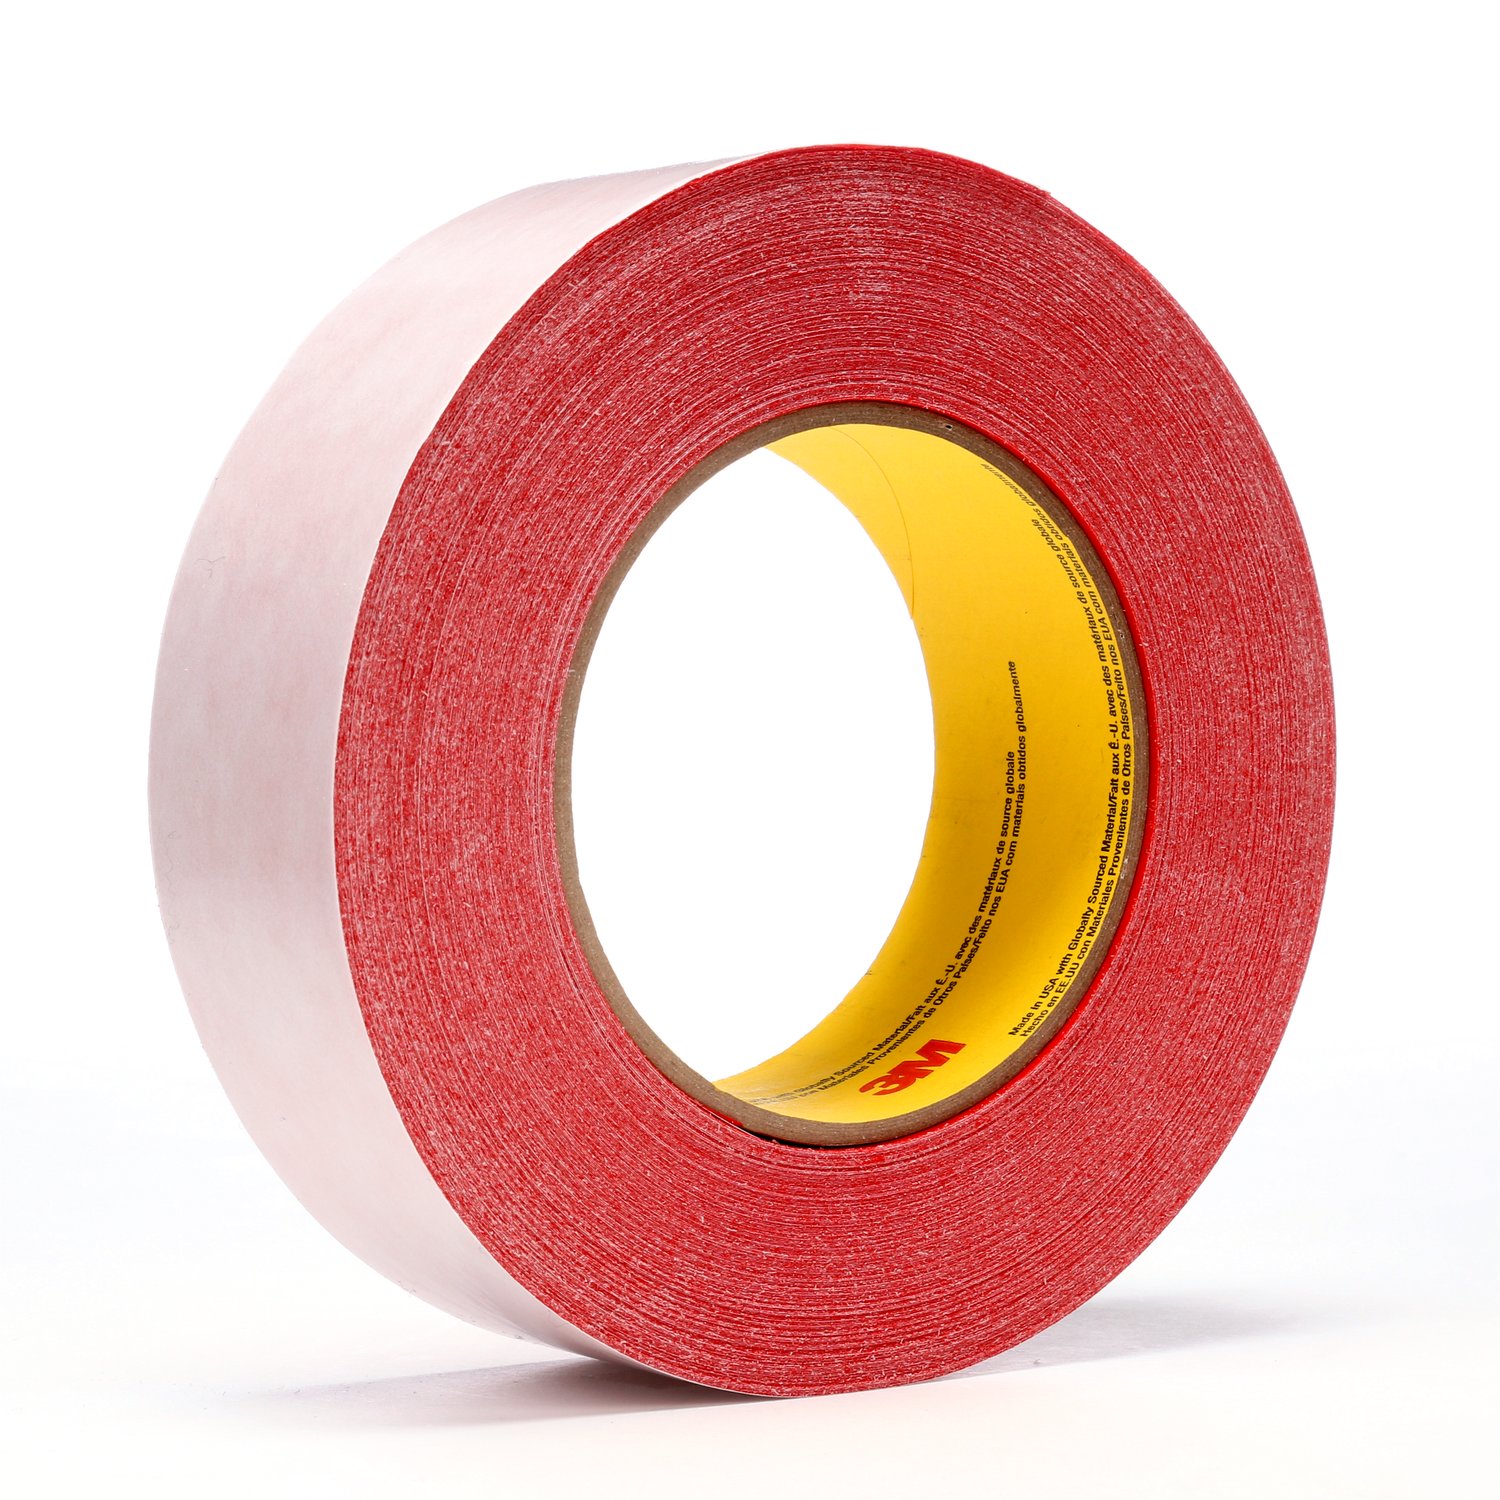 7000049264 - 3M Double Coated Tape 9737R, Red, 36 mm x 55 m, 3.5 mil, 32 rolls per
case